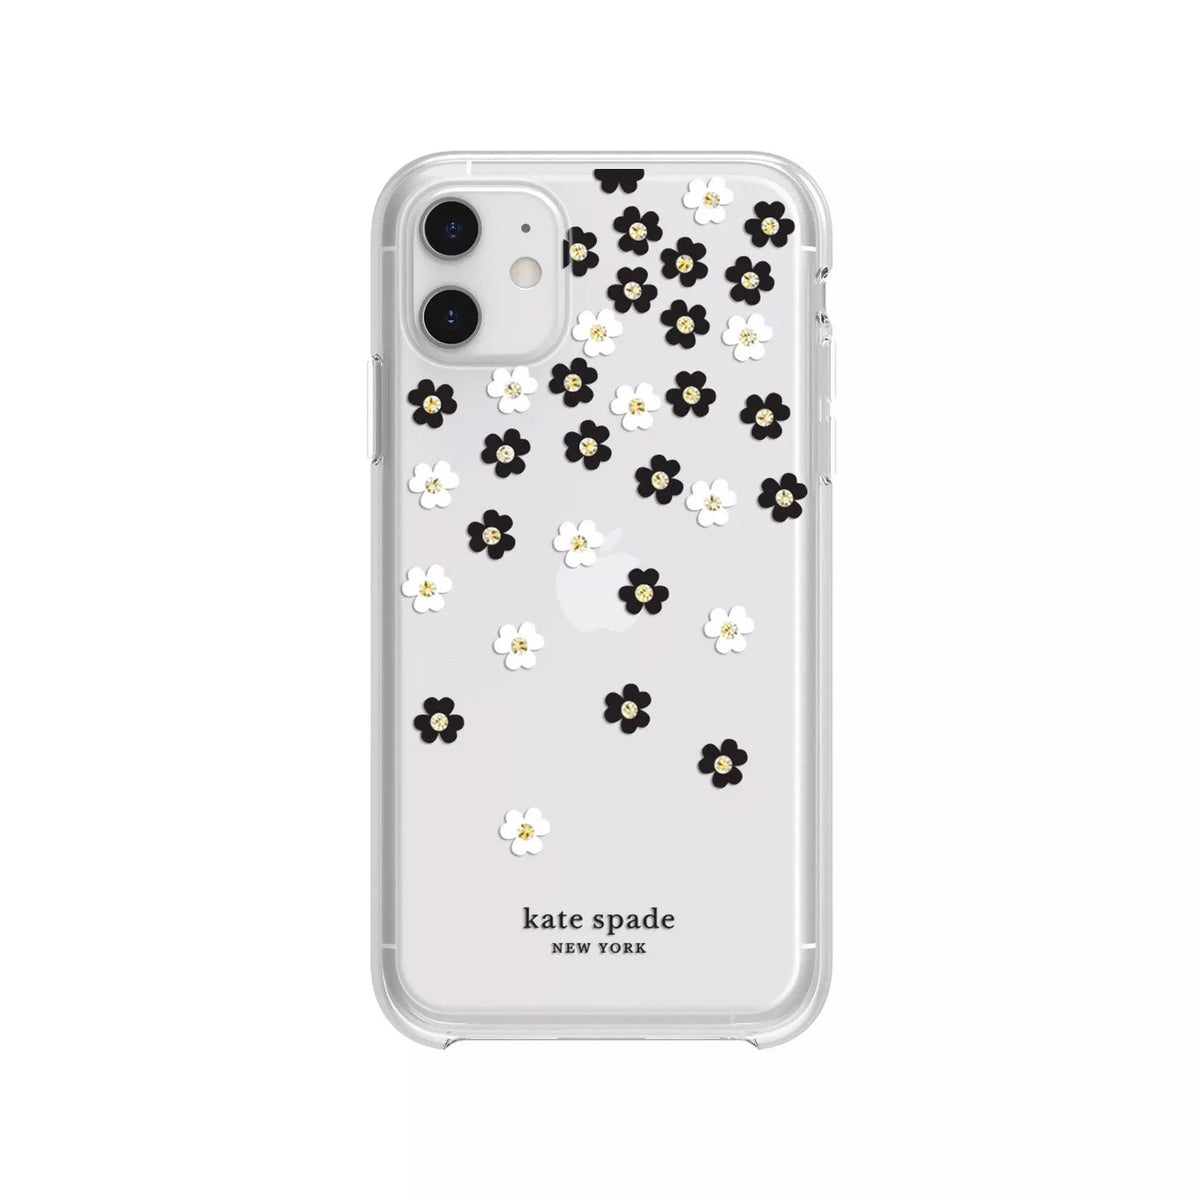 Kate Spade New York Protective Hardshell Case For Iphone 12 Mini (